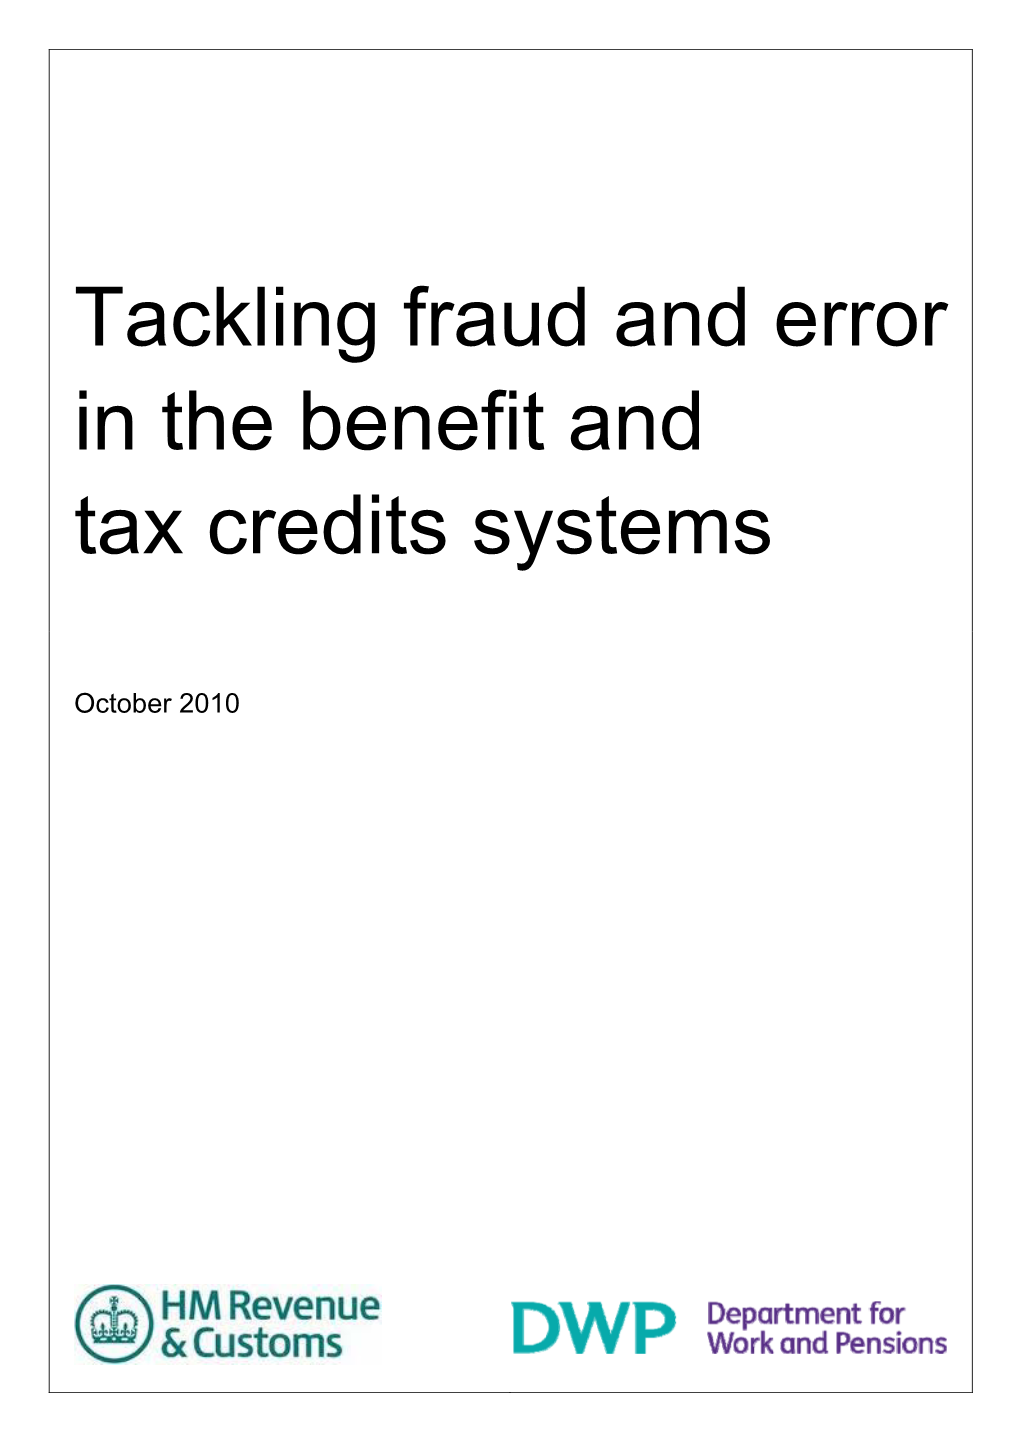 Tackling Fraud and Error in the Benefit and Tax Credits Systems